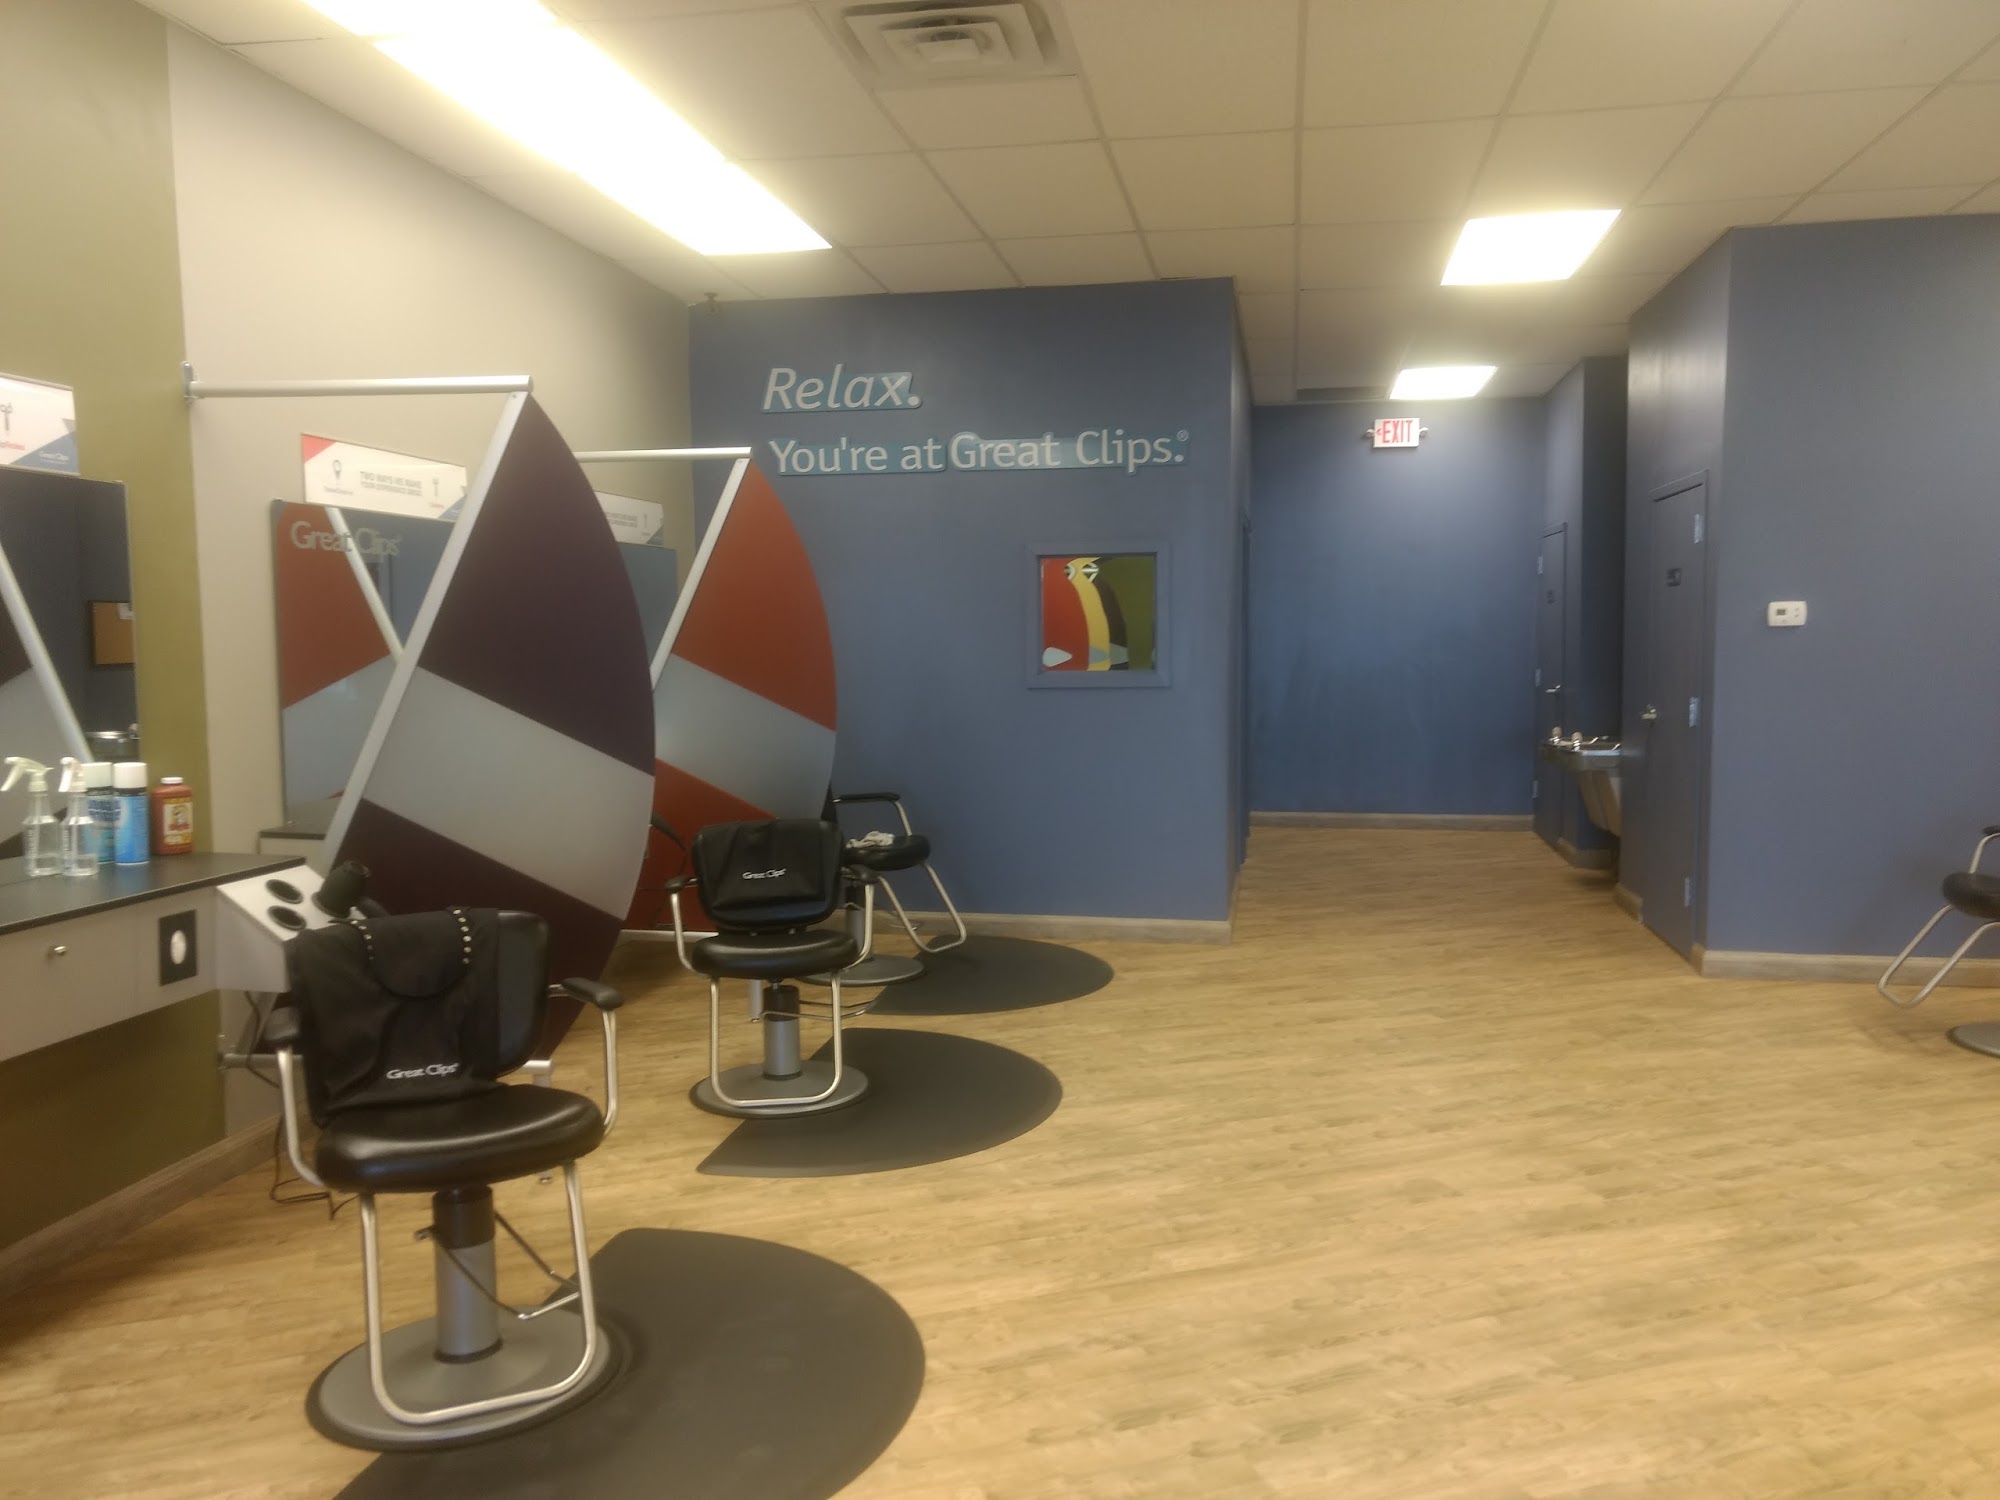 Great Clips 1827 S Wood Dr Ste 2, Okmulgee Oklahoma 74447